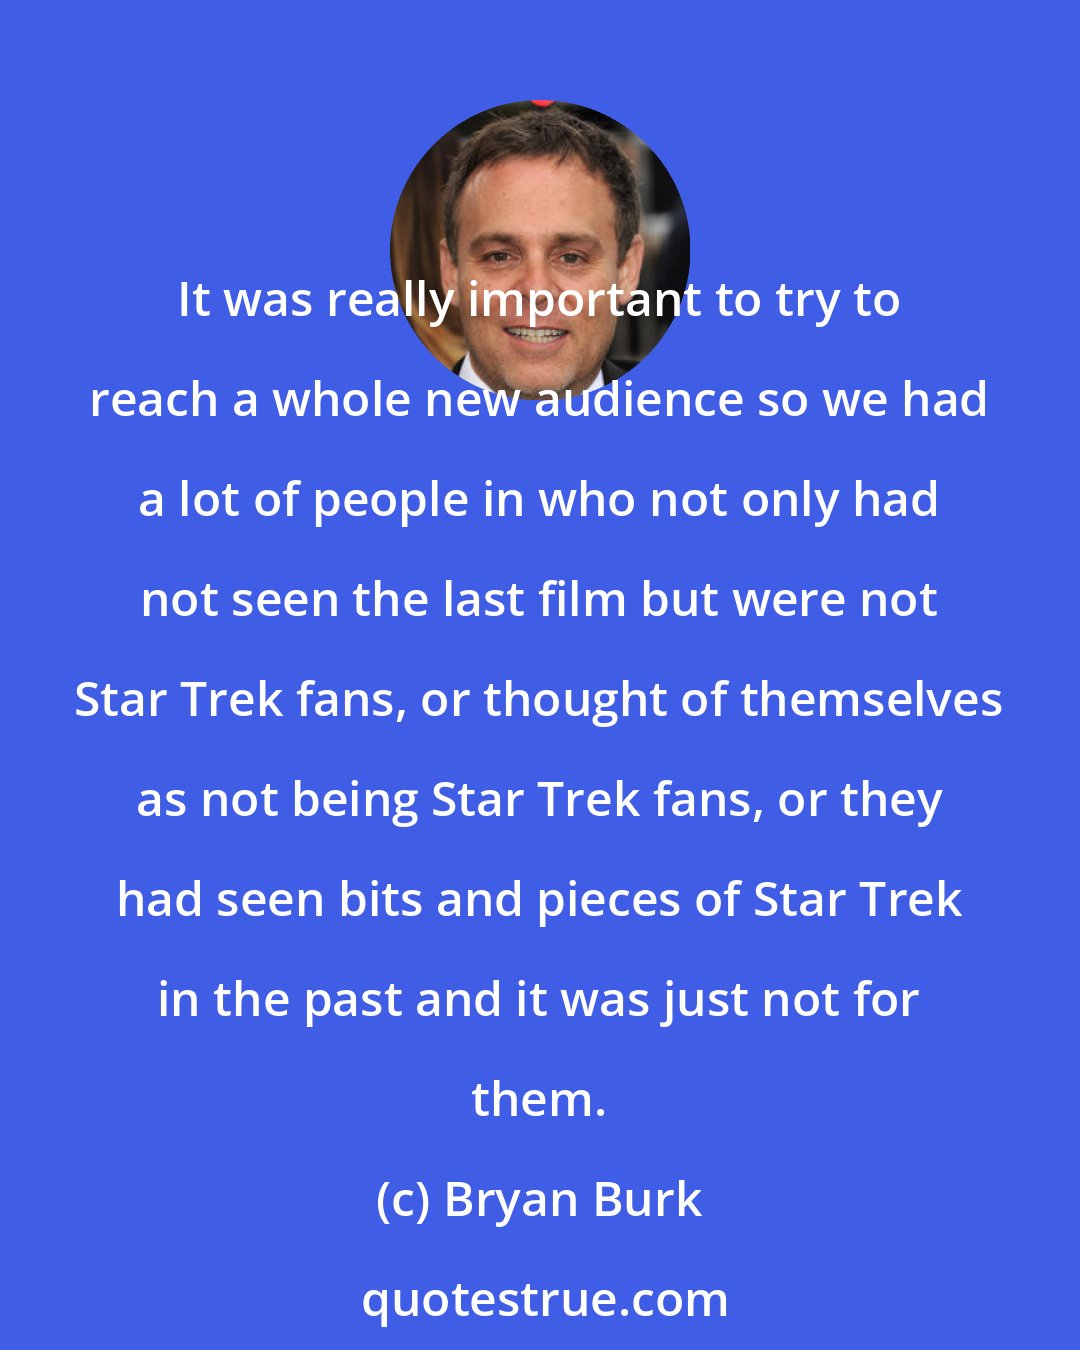 Bryan Burk: It was really important to try to reach a whole new audience so we had a lot of people in who not only had not seen the last film but were not Star Trek fans, or thought of themselves as not being Star Trek fans, or they had seen bits and pieces of Star Trek in the past and it was just not for them.